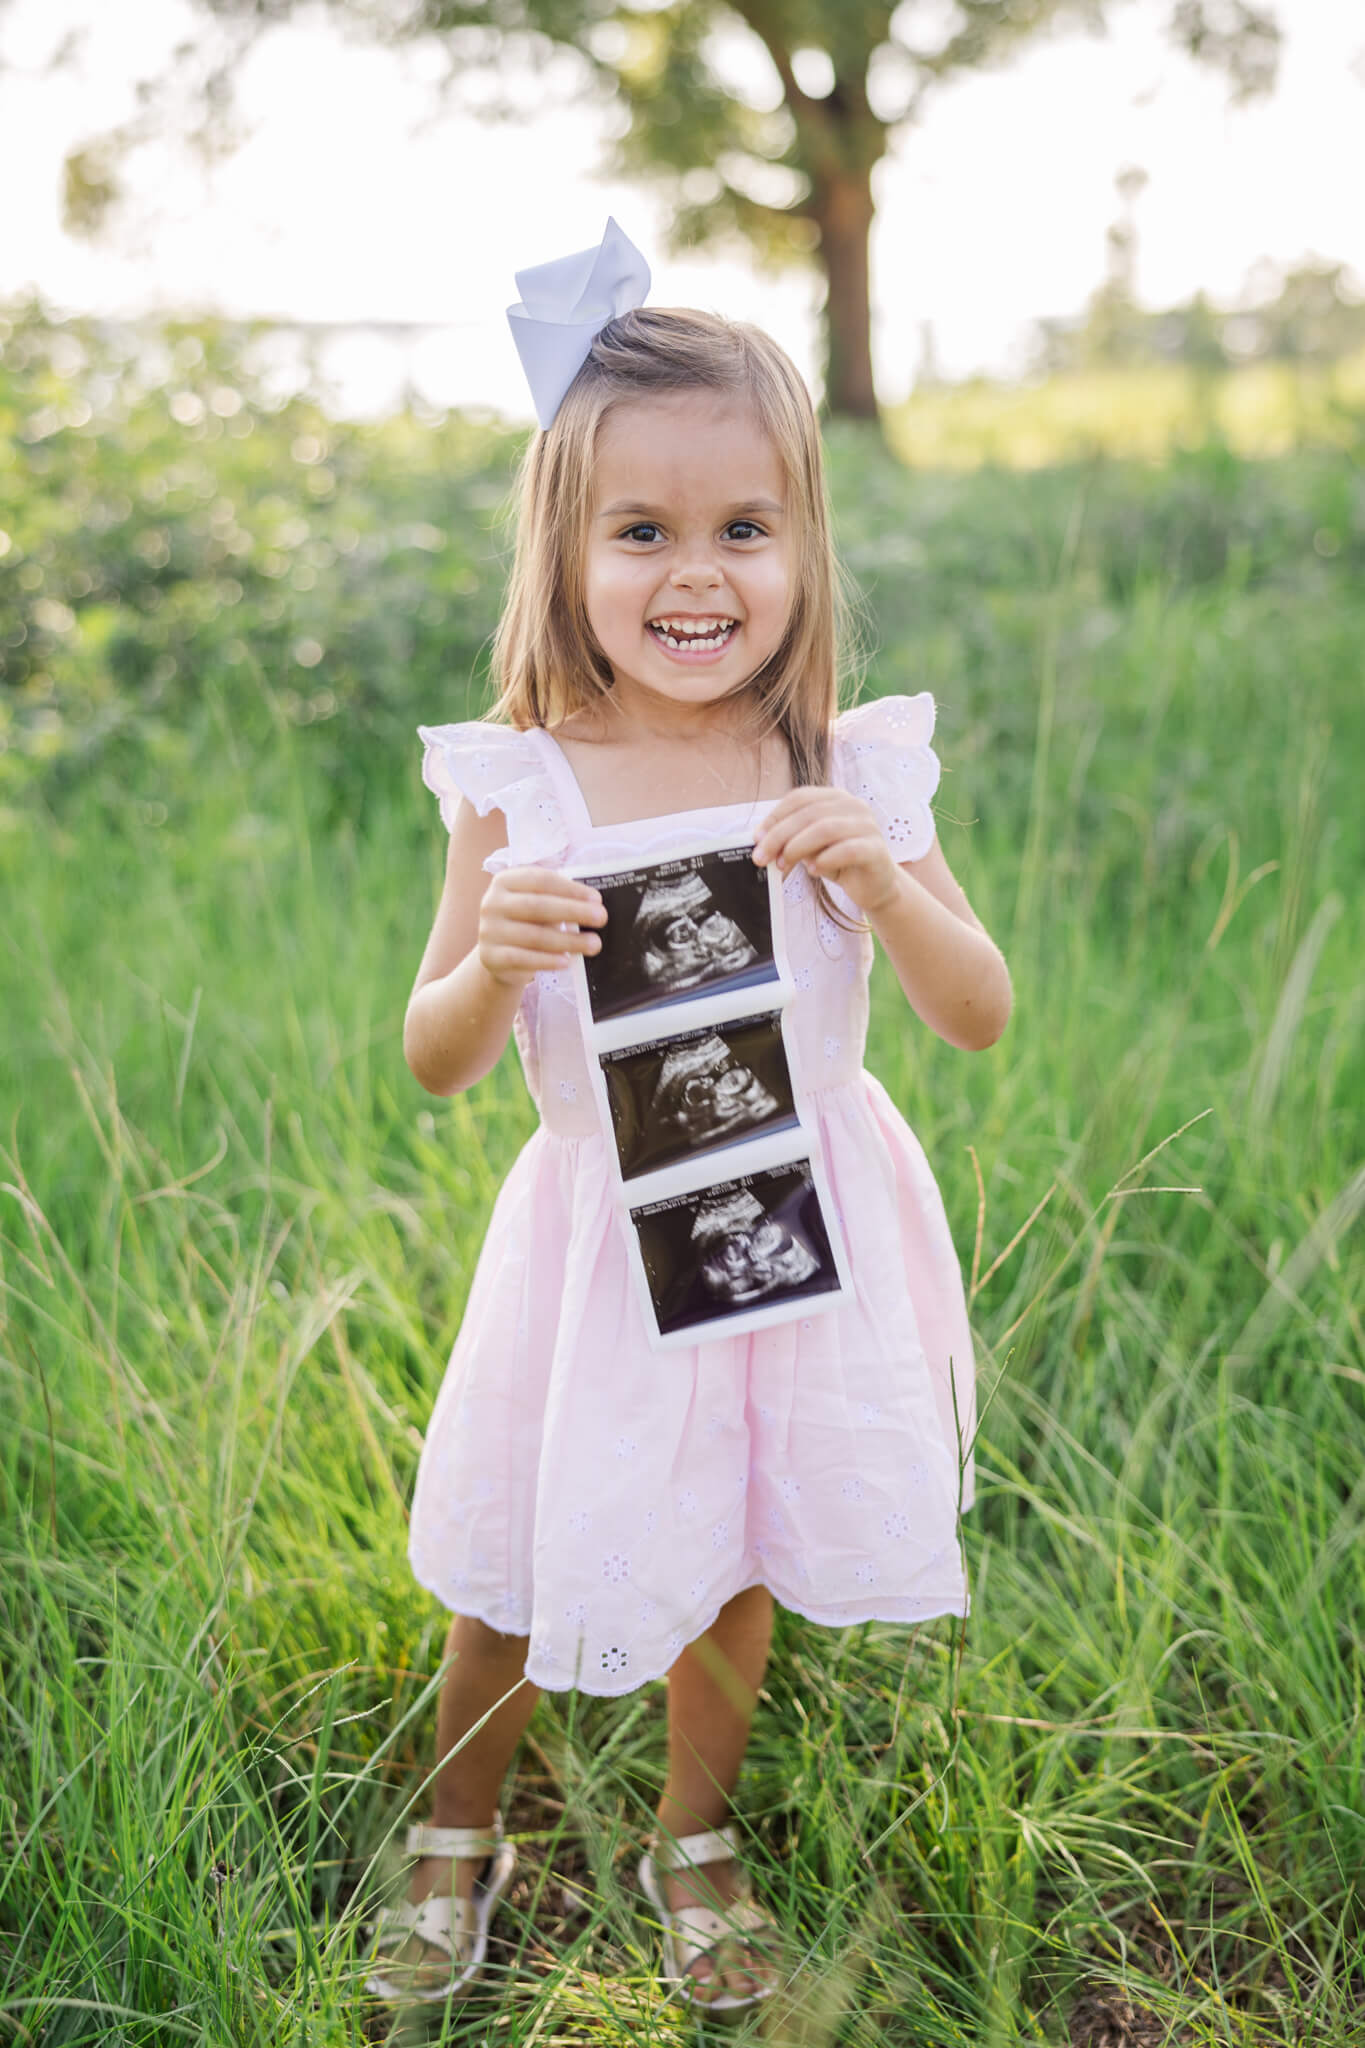 Little girl showing off sonogram picture of her future younger sibling